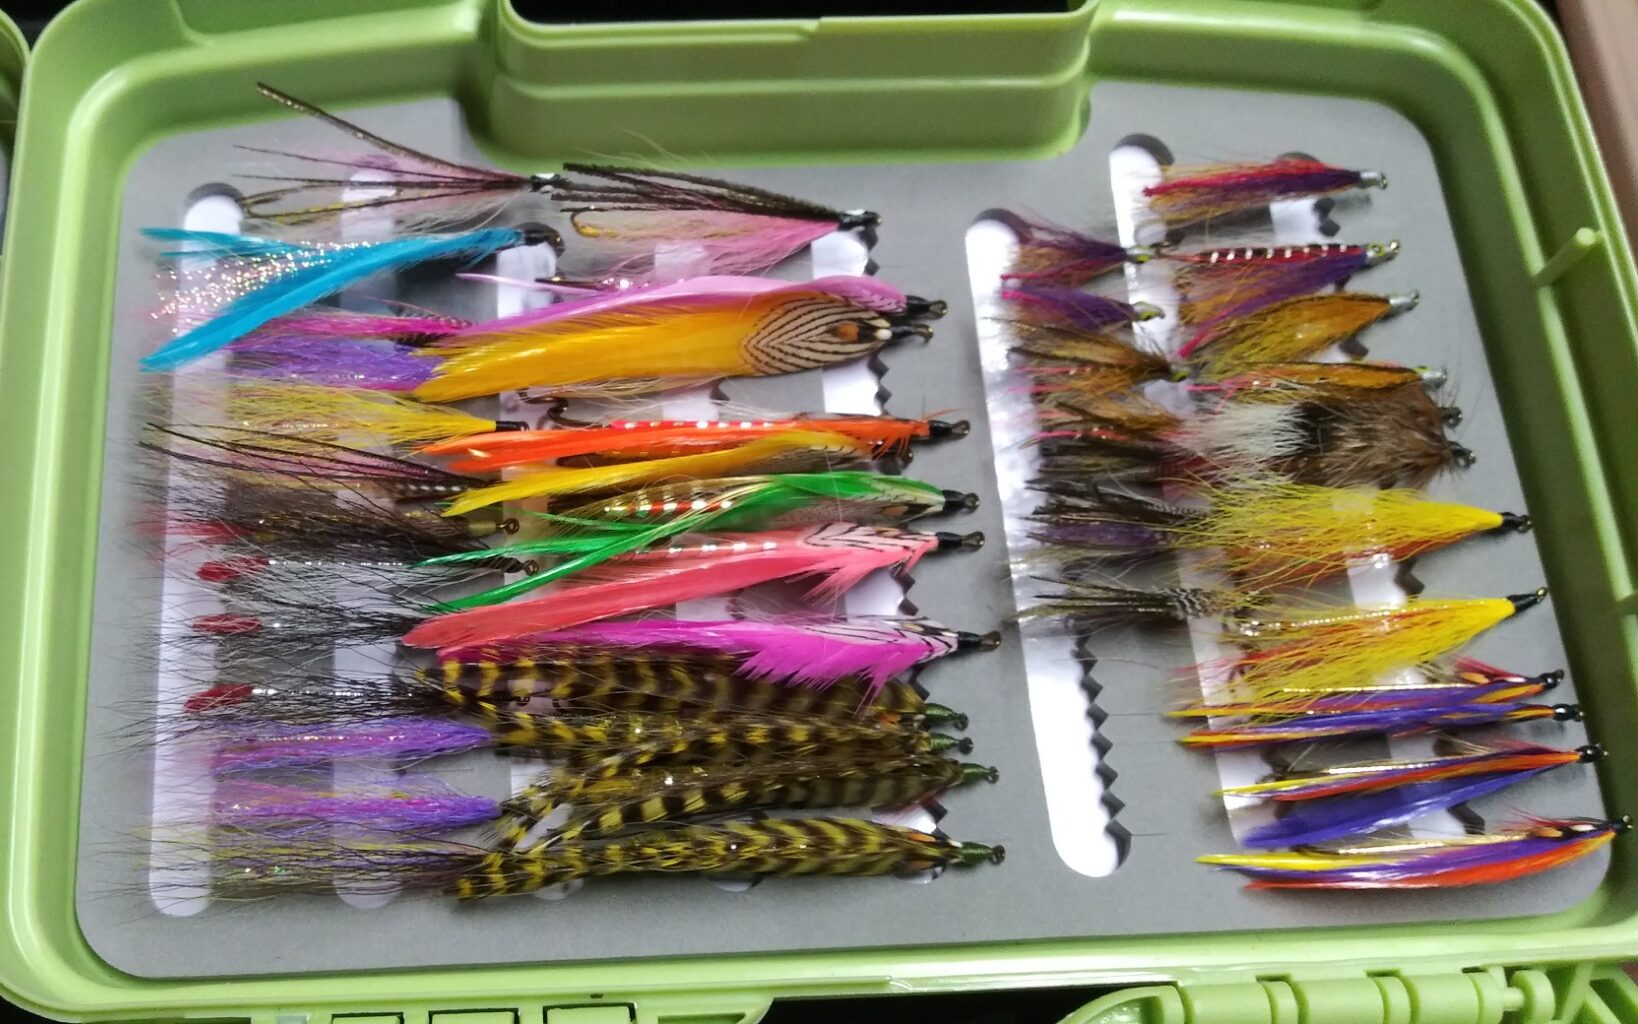 Super streamer patterns for spring - The County